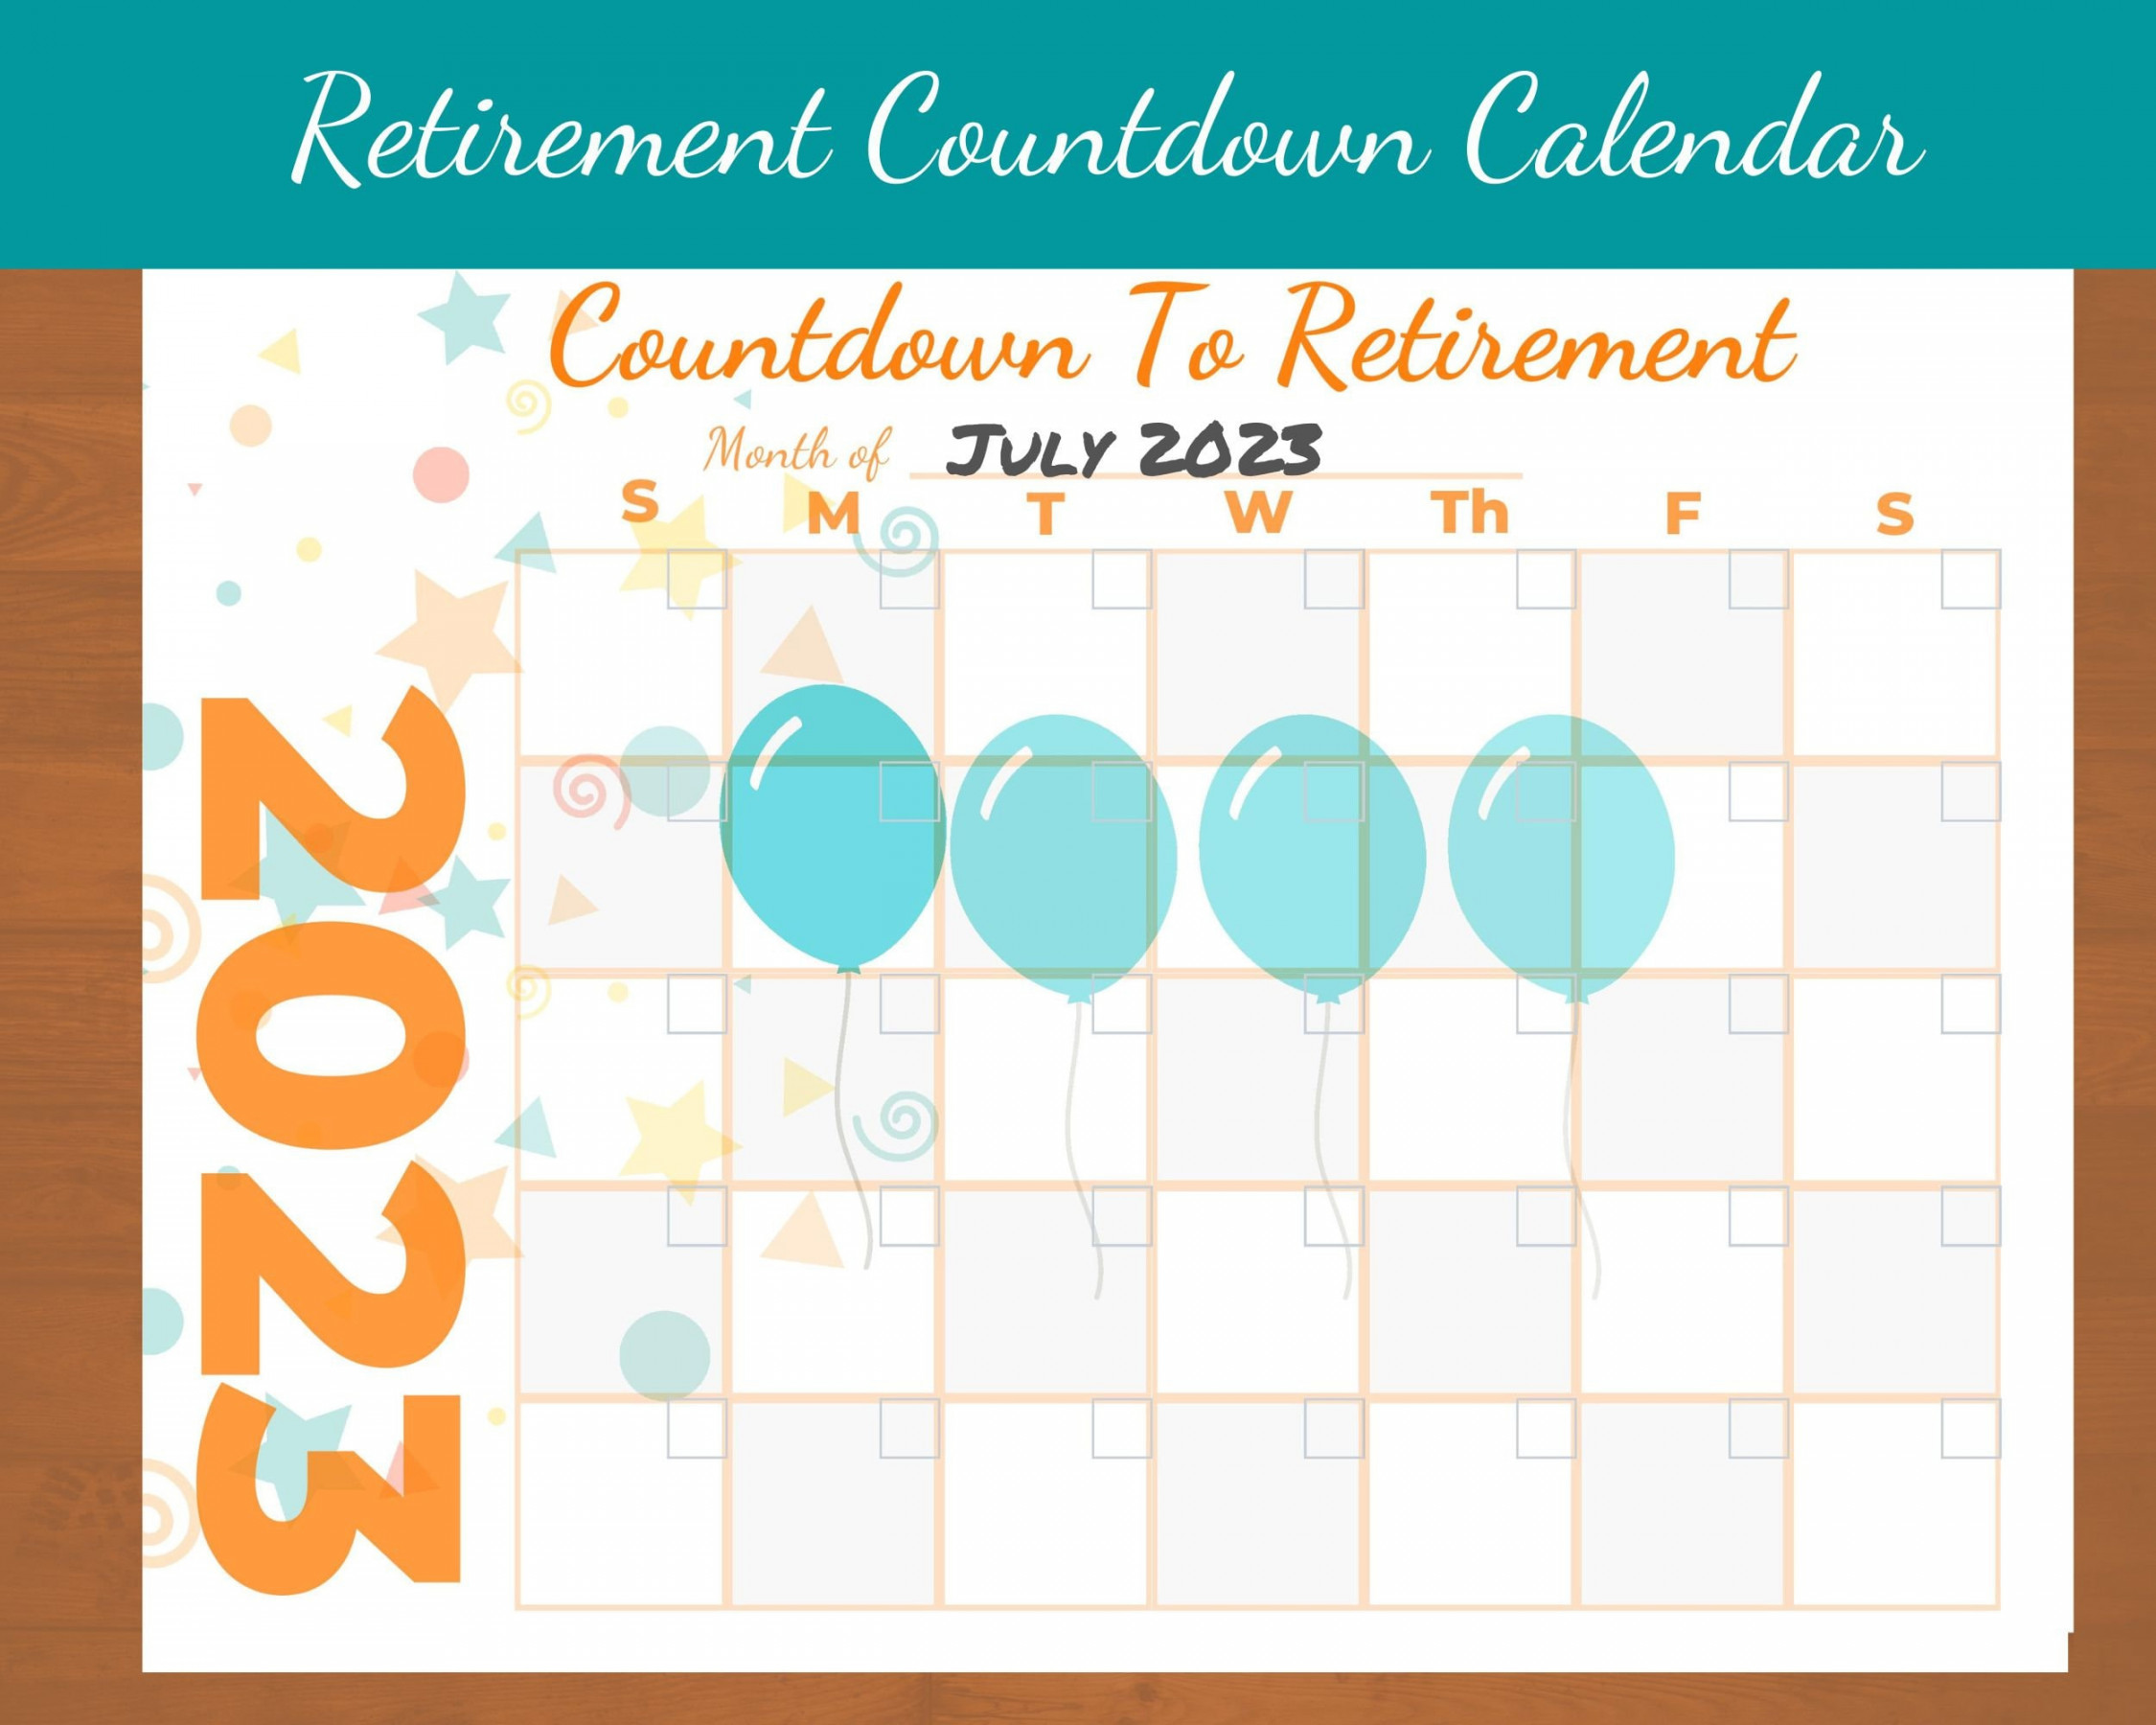 Countdown to Retirement Printable Calendar Fun Way to Count - Etsy